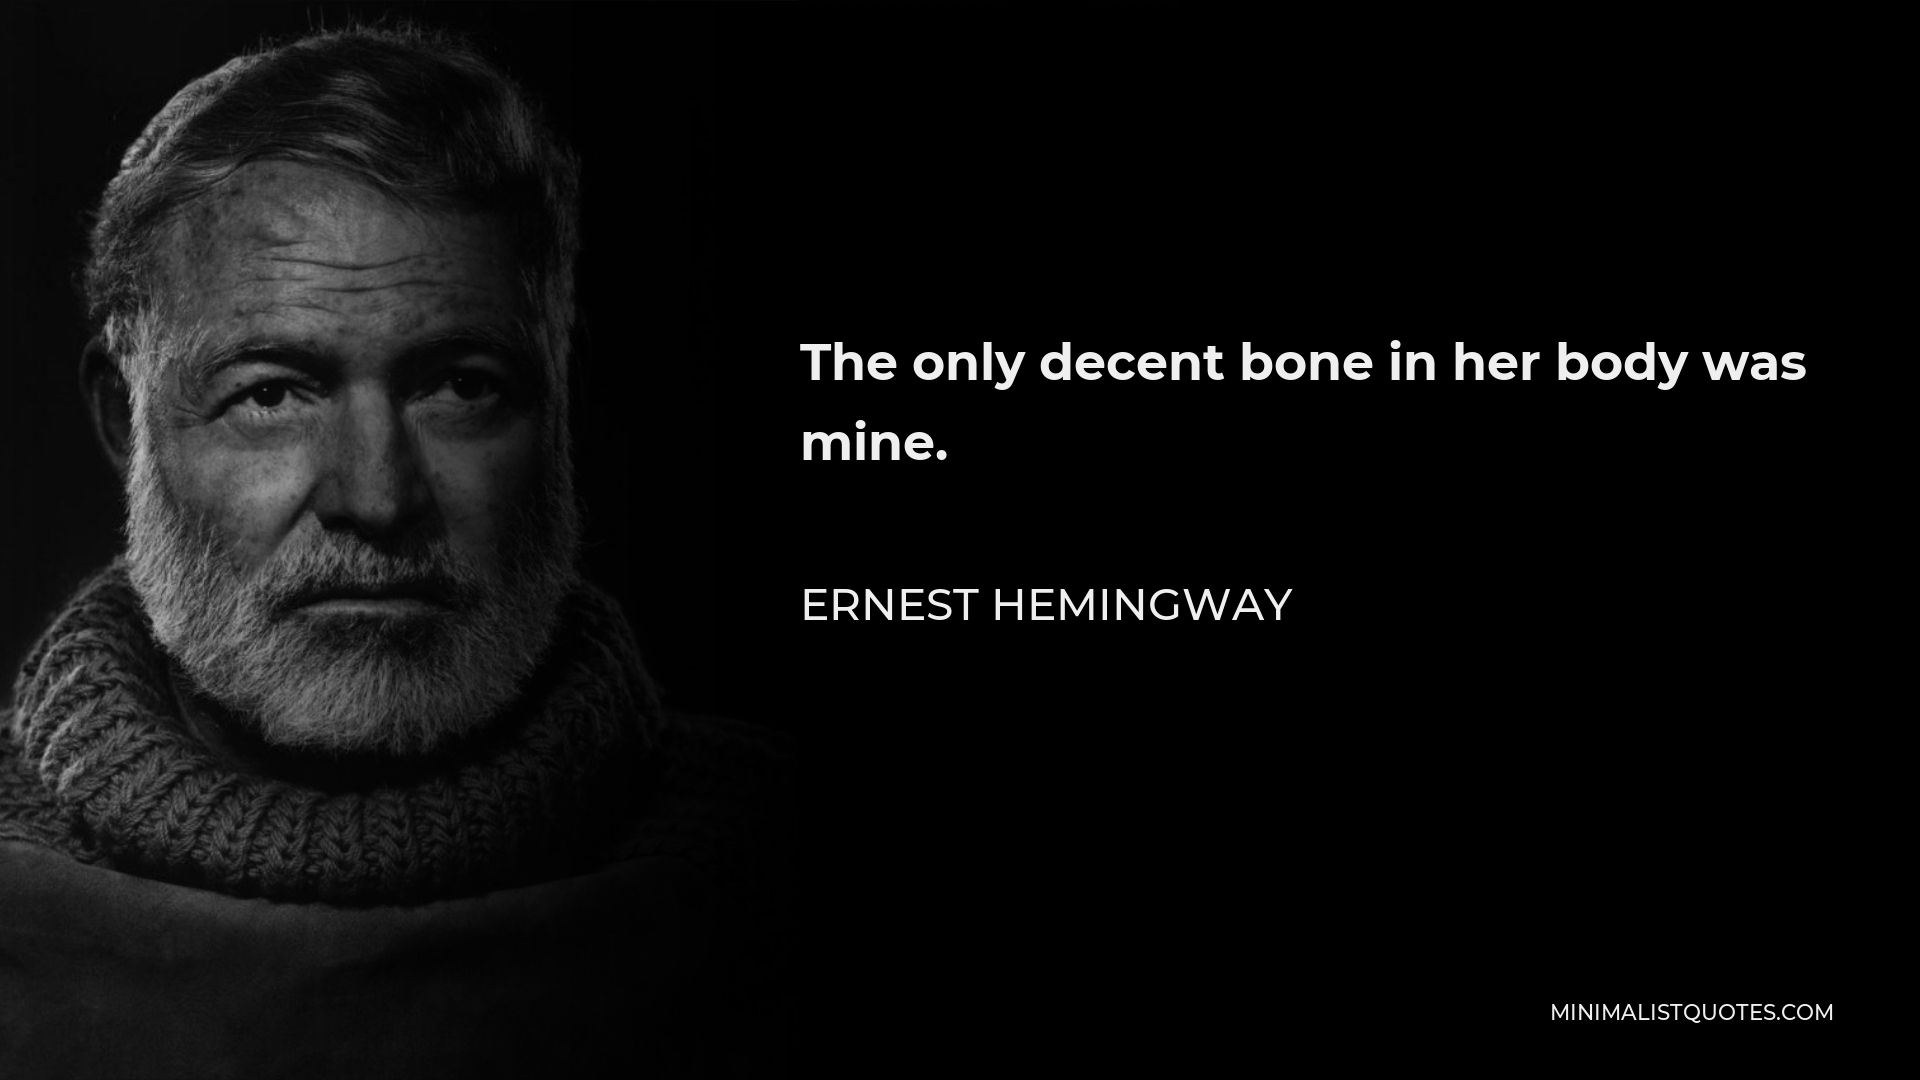 Ernest Hemingway Quote - The only decent bone in her body was mine.